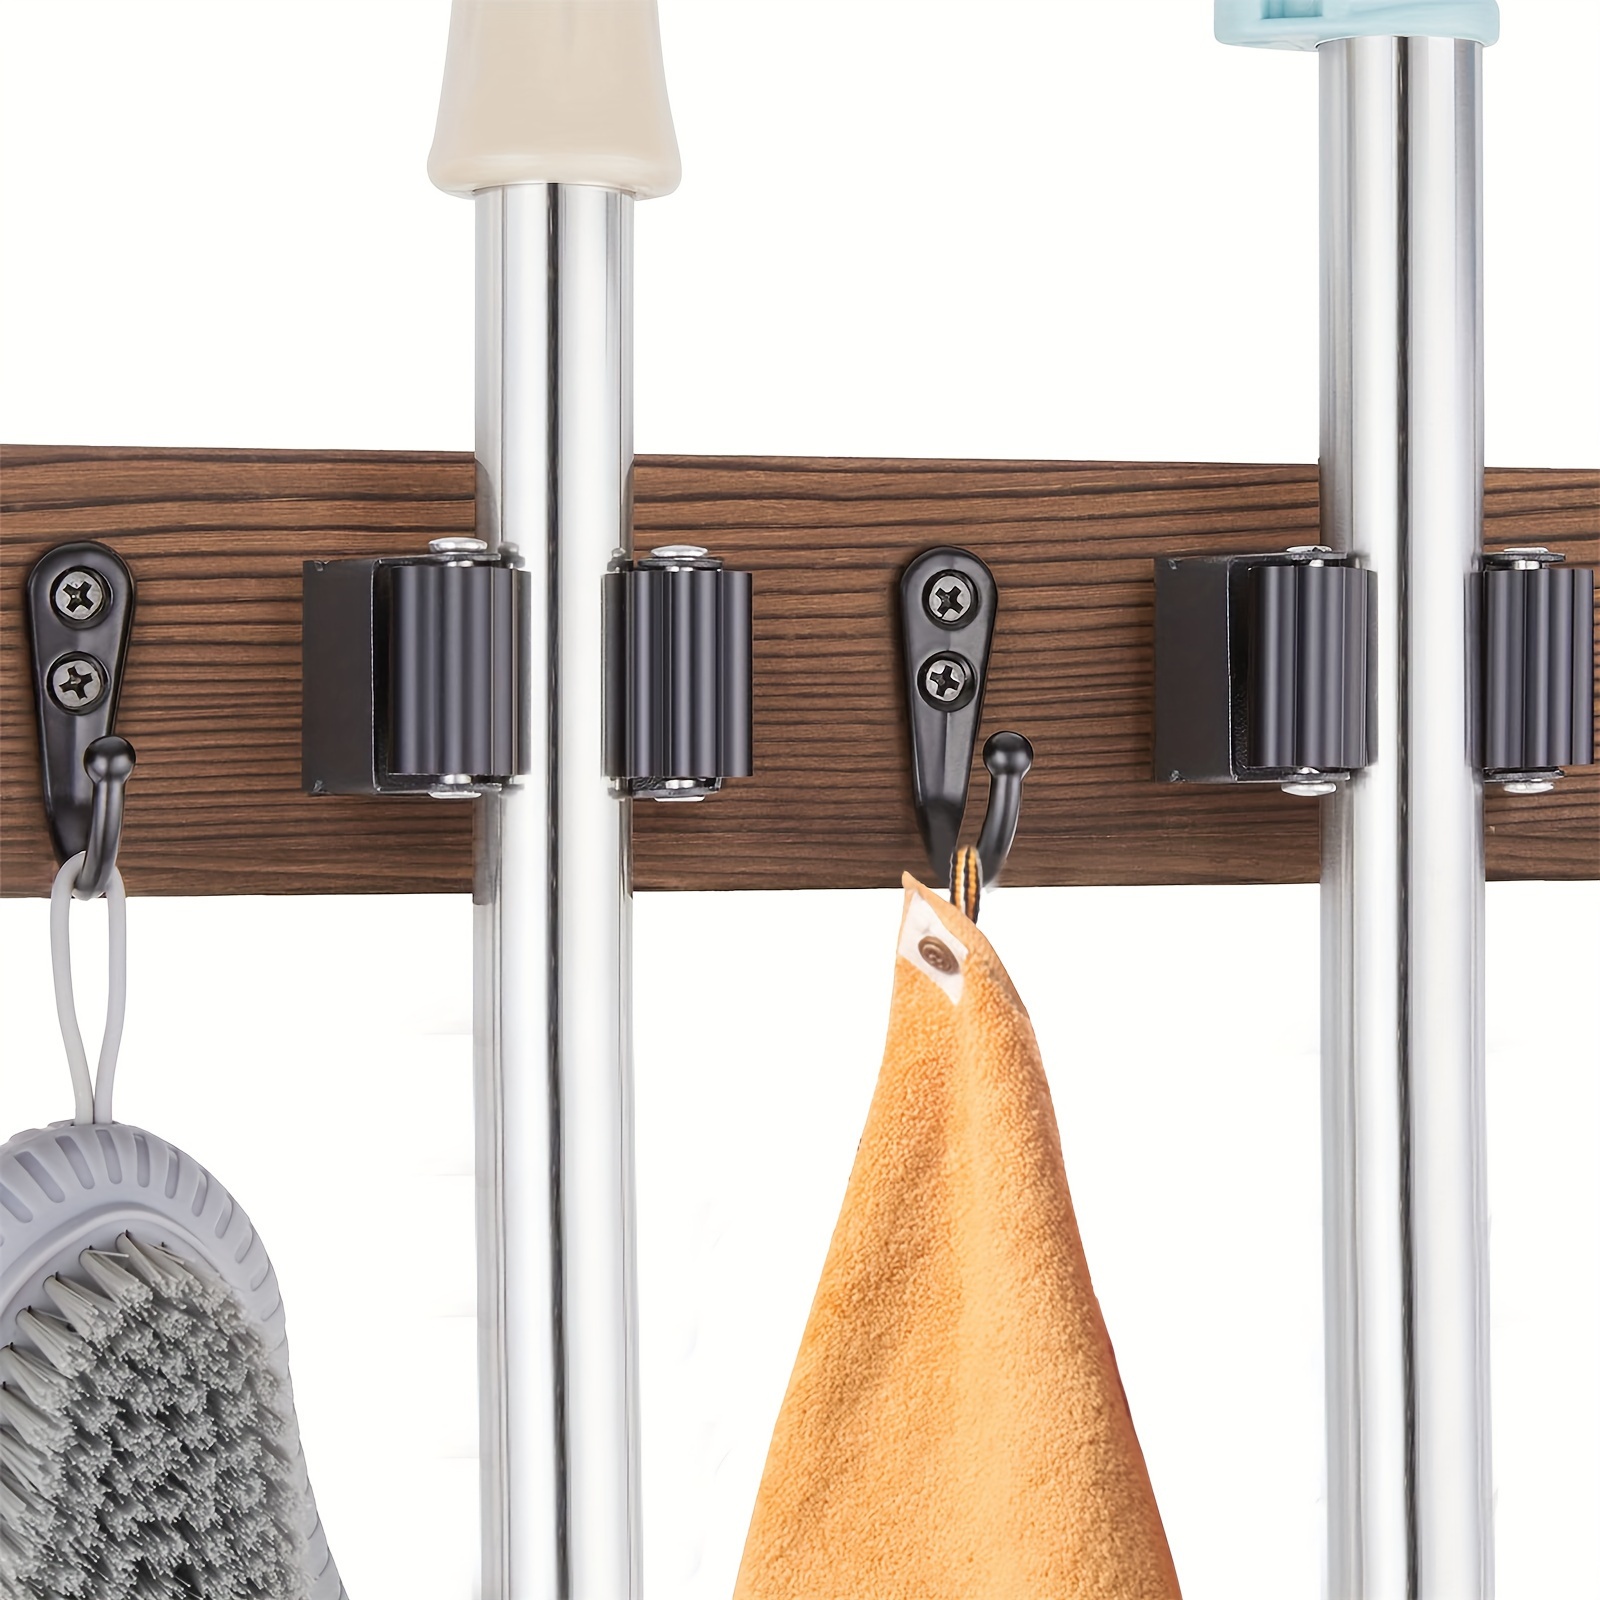 

Rustic Charm & Organization: Wood Wall-mounted Mop Broom Holder - A Must-have For Your Garage, Closet, Or Laundry Room